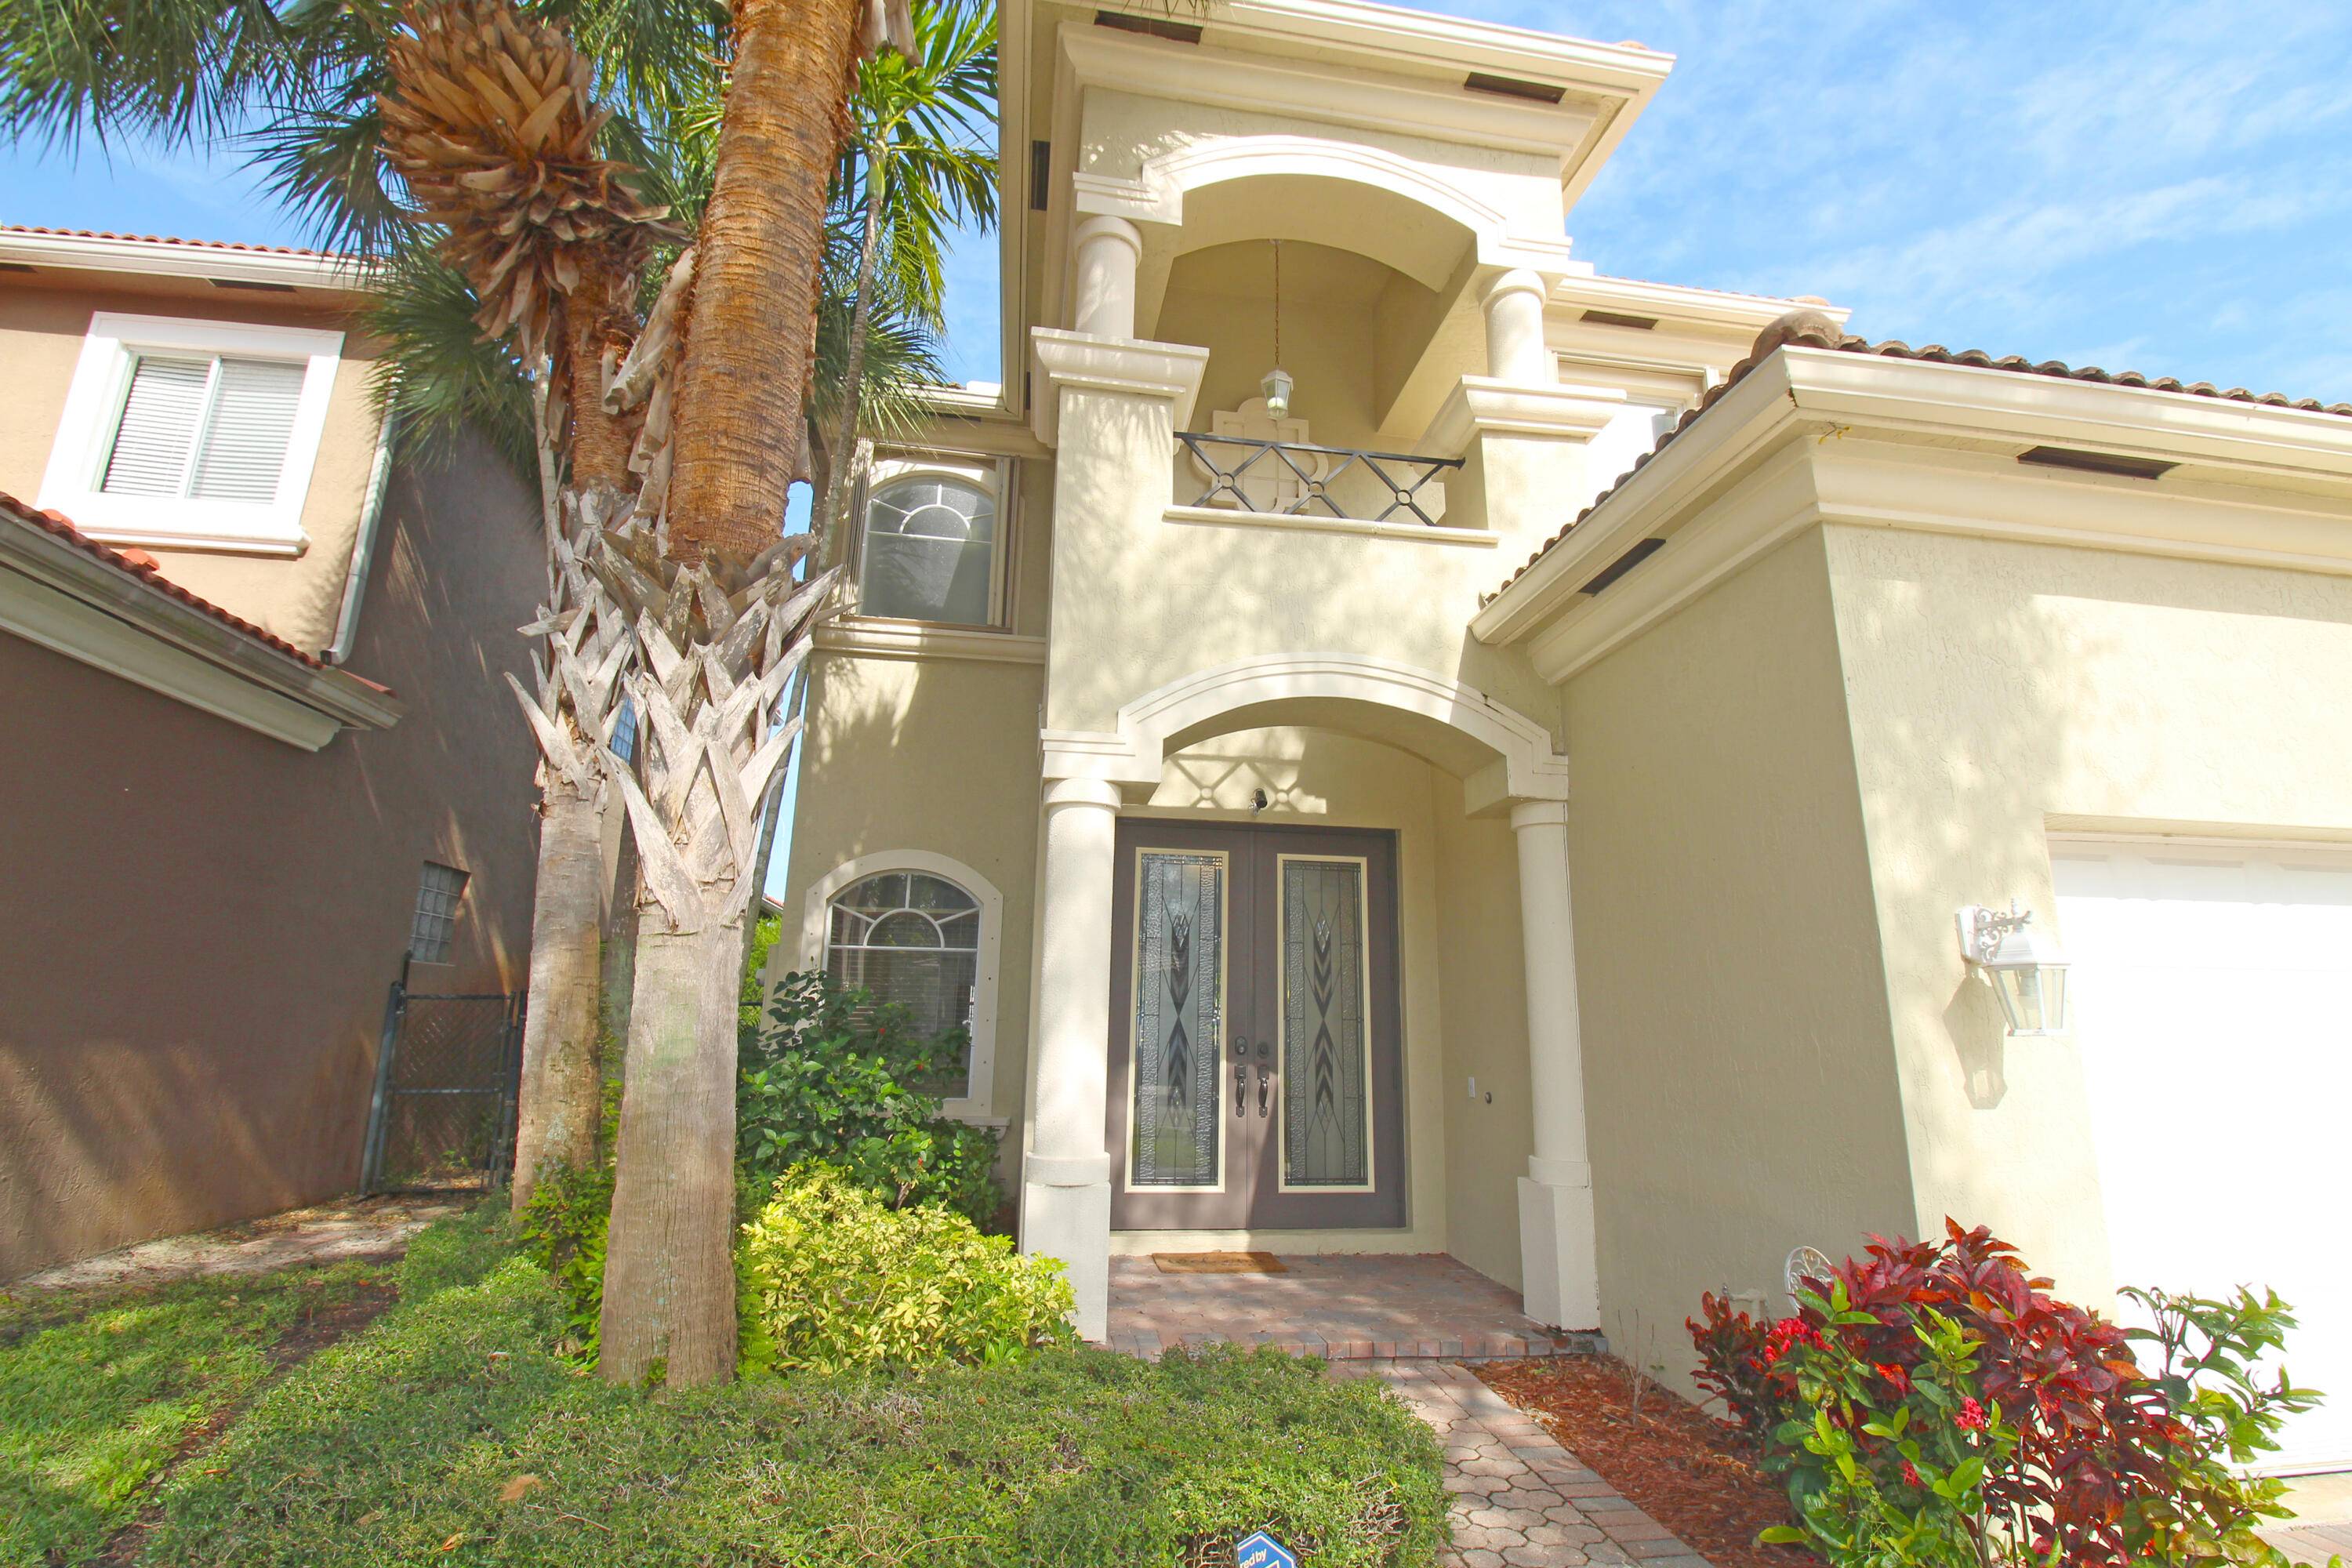 A must see in the highly desirable gated community of Palmyra Estates in Boynton Beach.